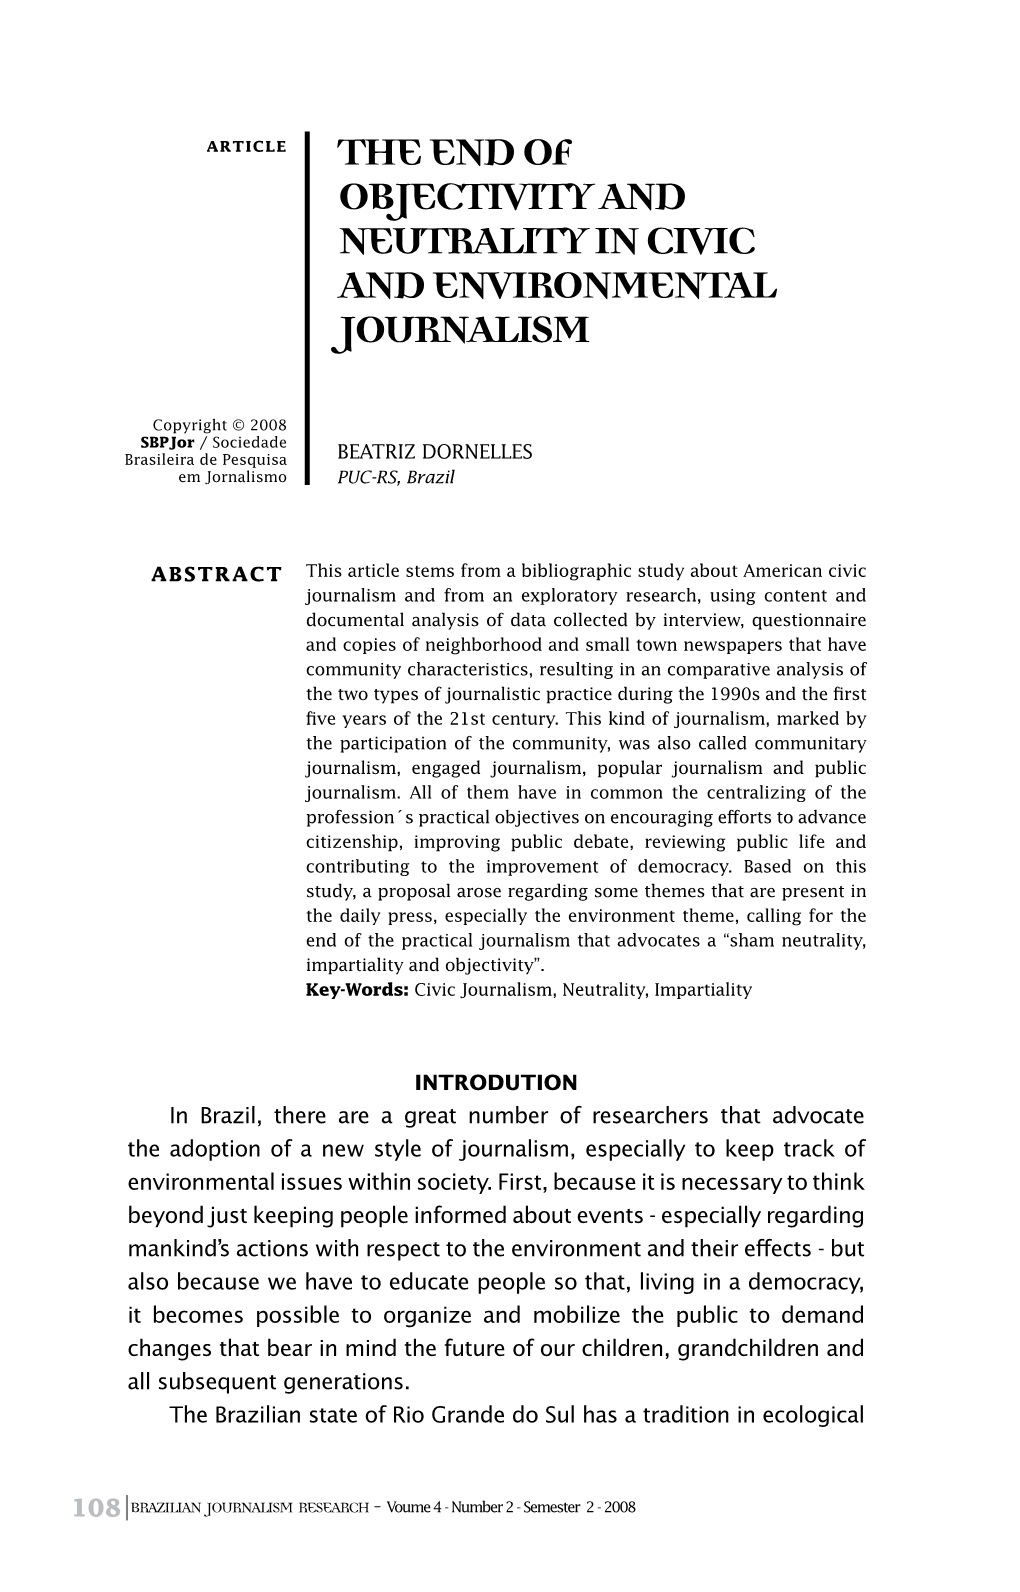 The End of Objectivity and Neutrality in Civic and Environmental Journalism